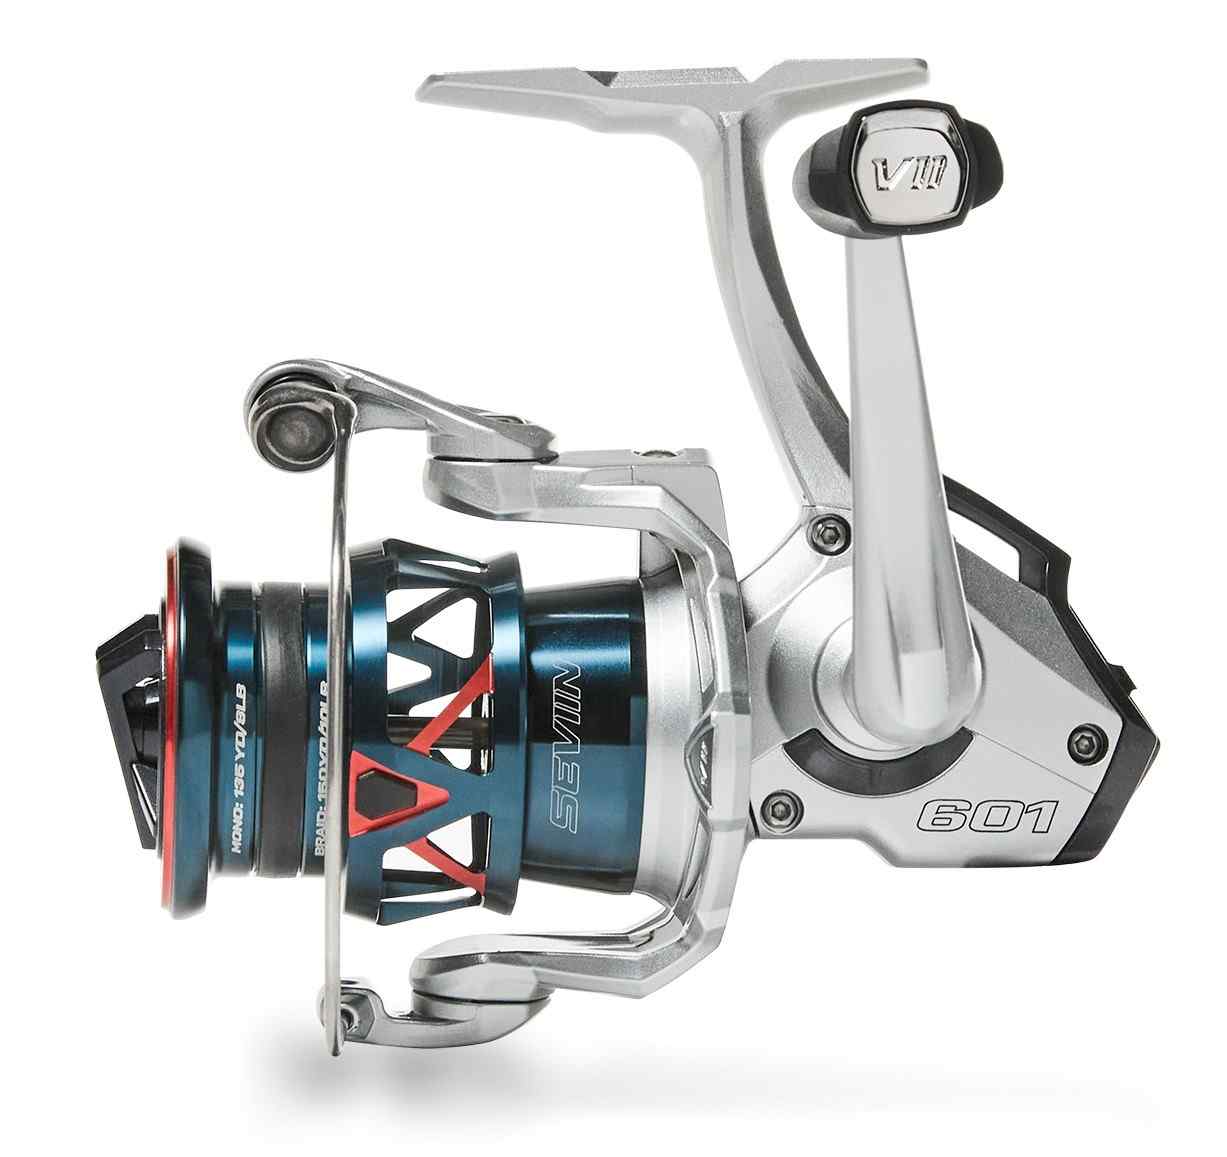 Introducing NEW Piscifun Carbon X Spinning Reel 